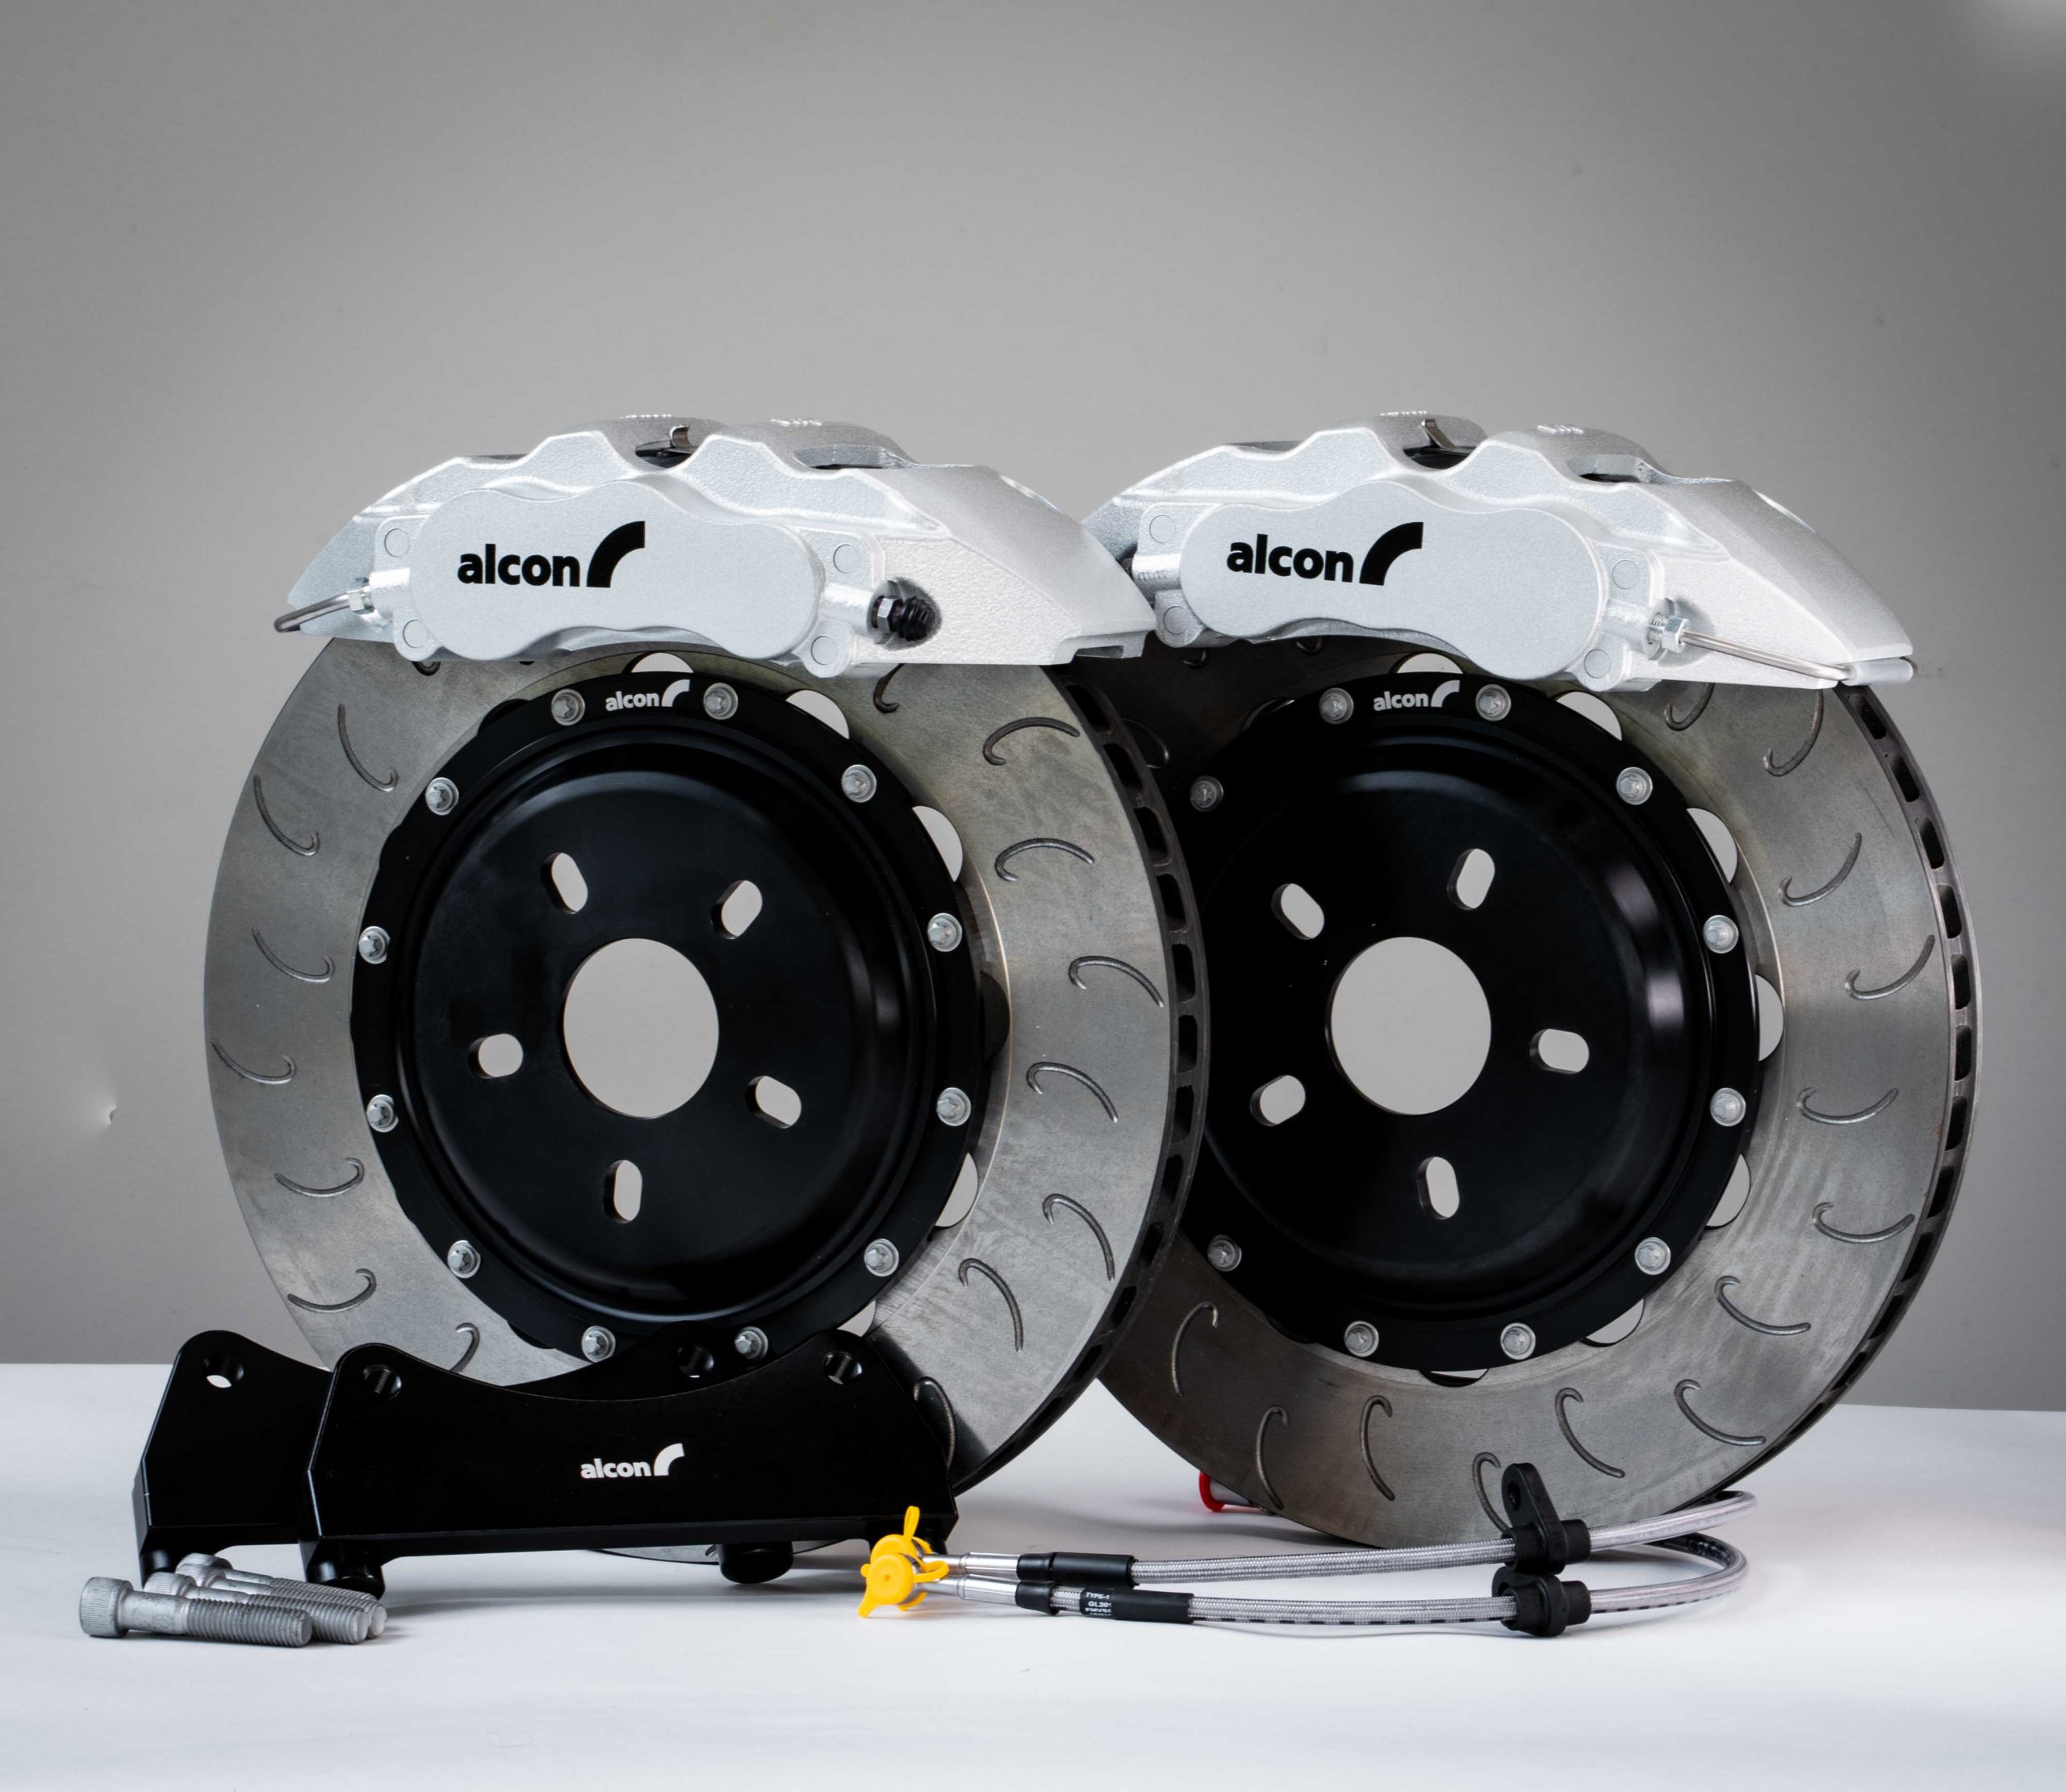 Alcon performance brakes center for medicare and medicaid services mission